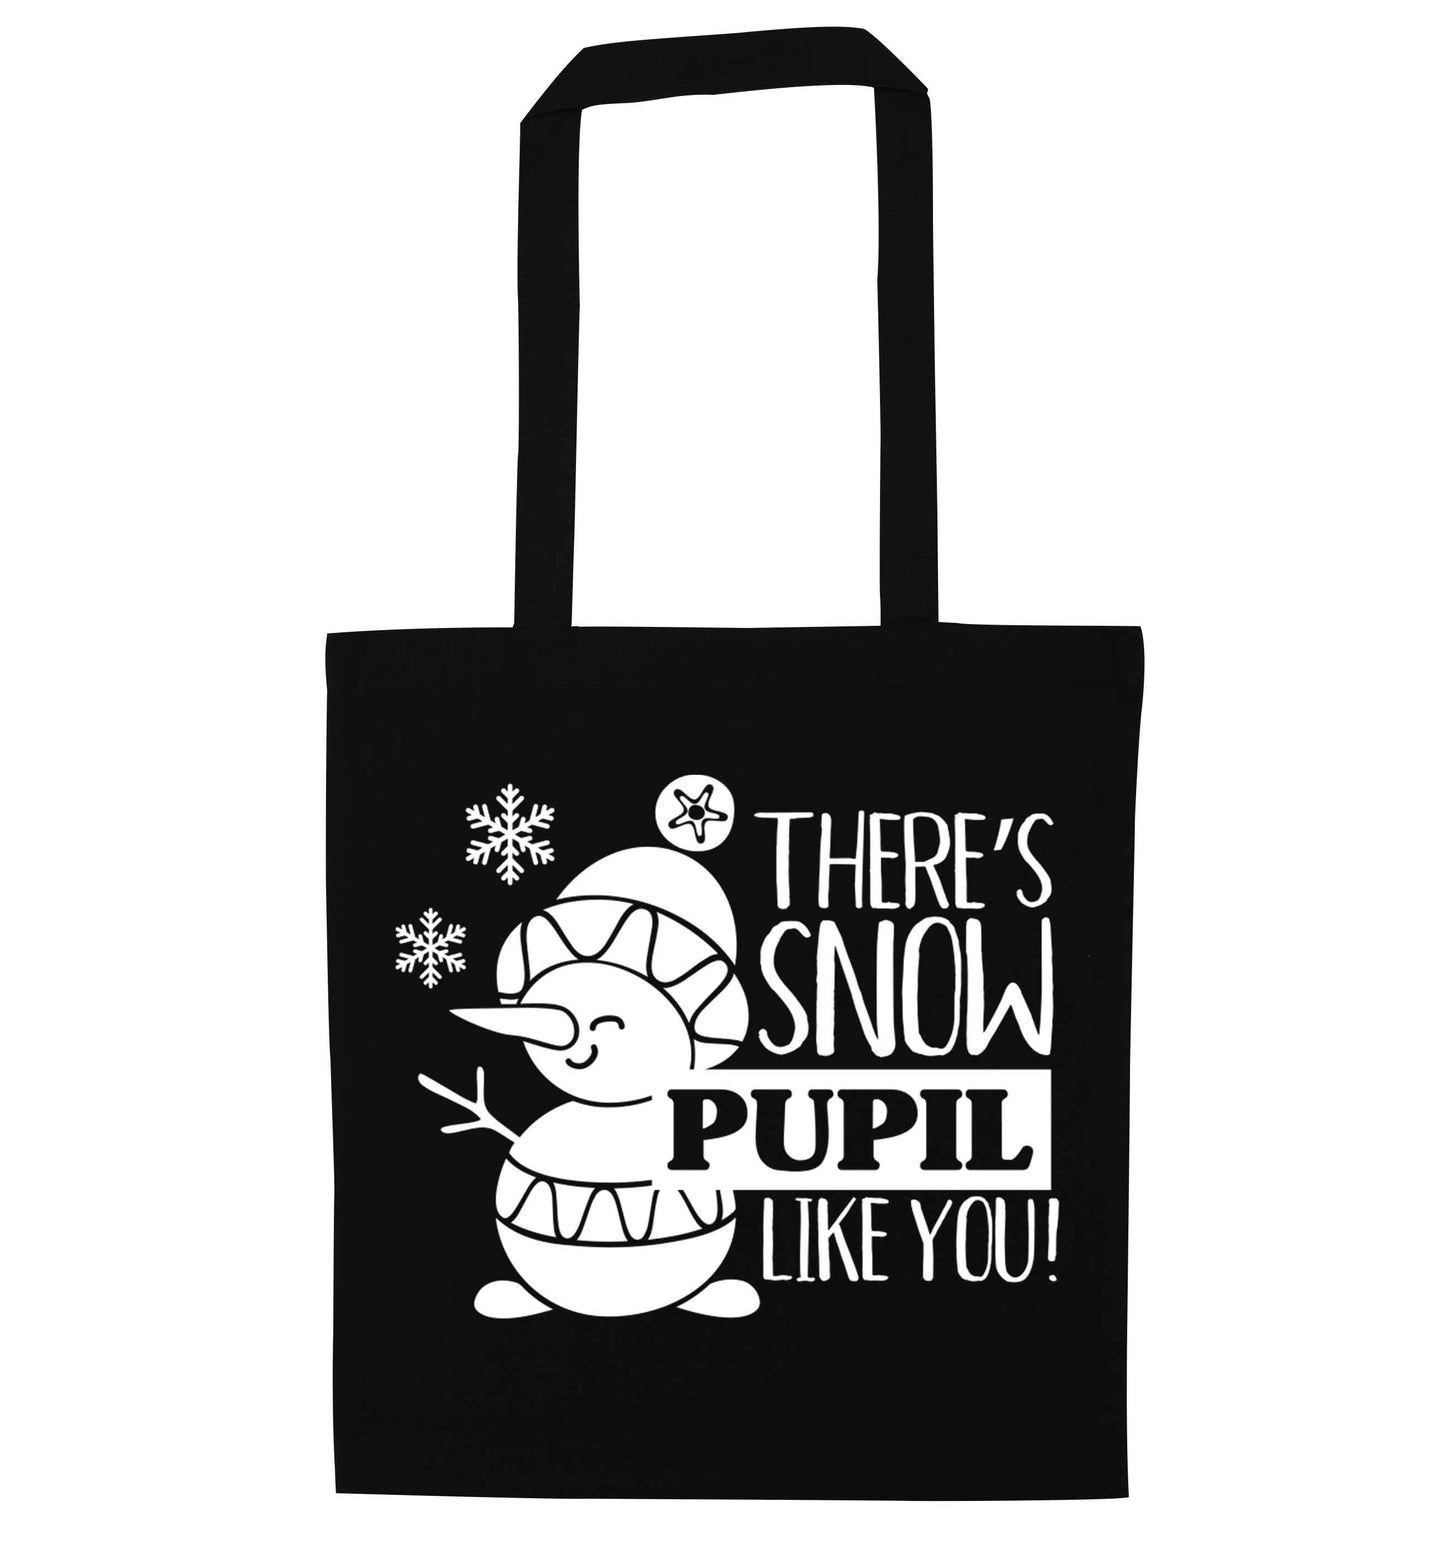 There's snow pupil like you black tote bag